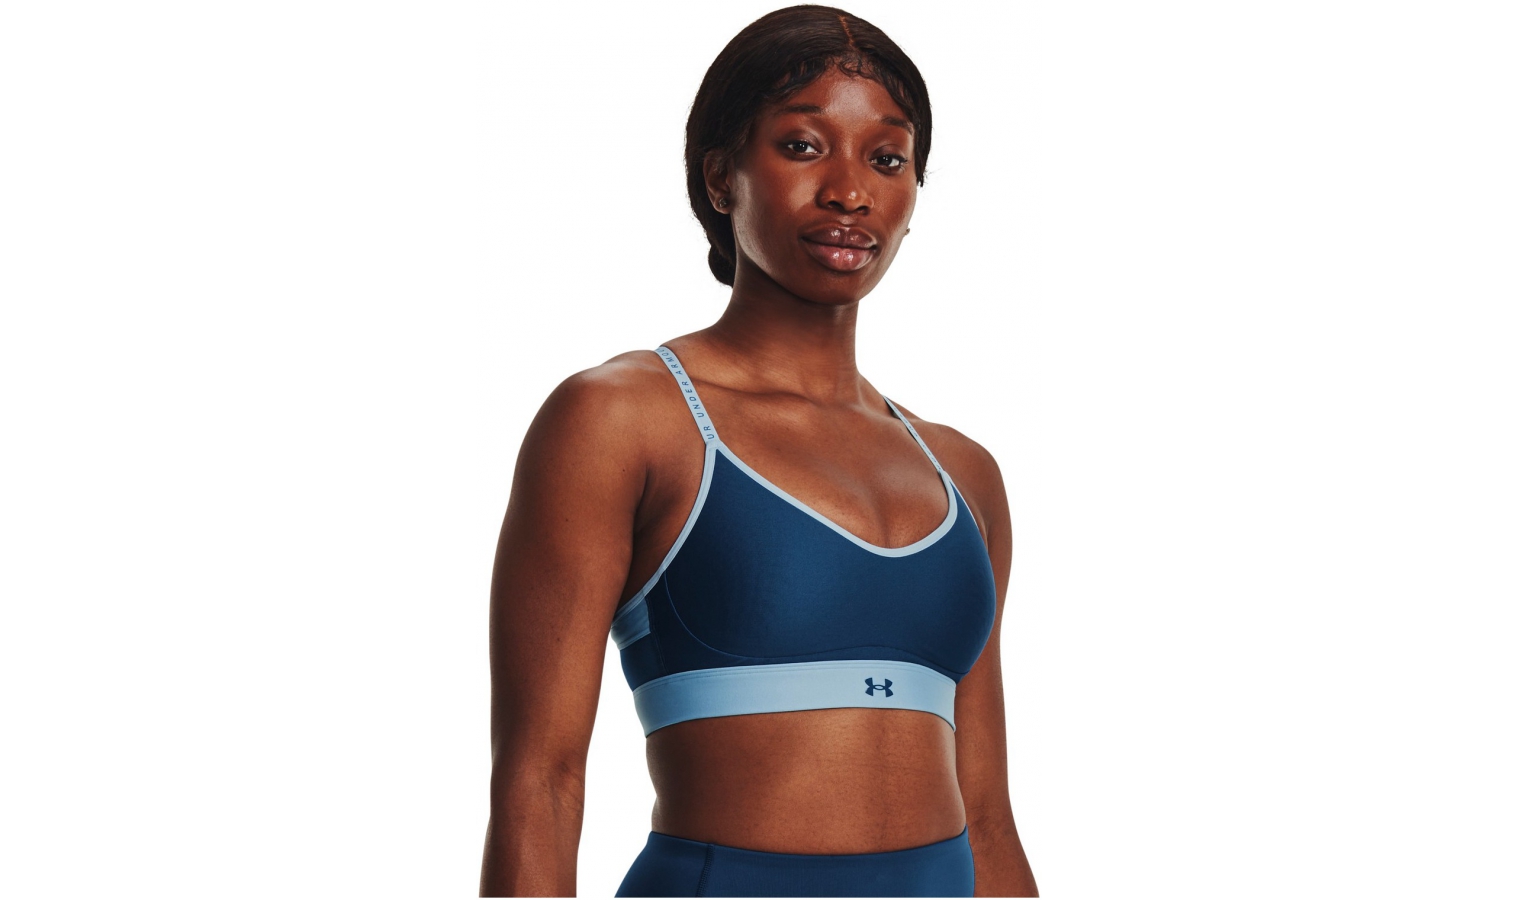 Under Armour Infinity Low Womens Sports Bra - Tops - Fitness